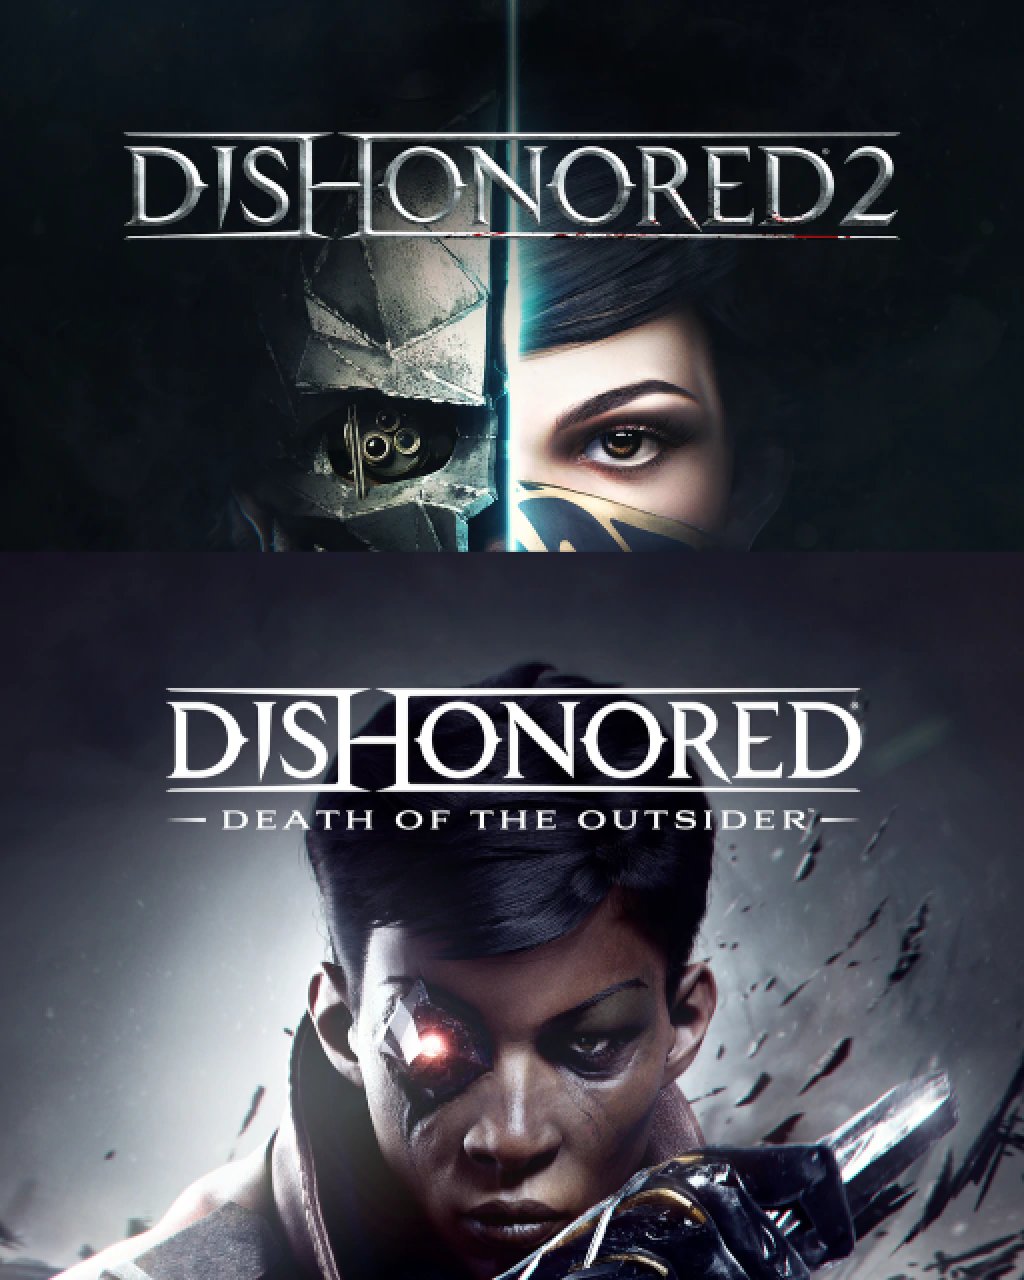 Dishonored 2 + Dishonored Death of the Outsider